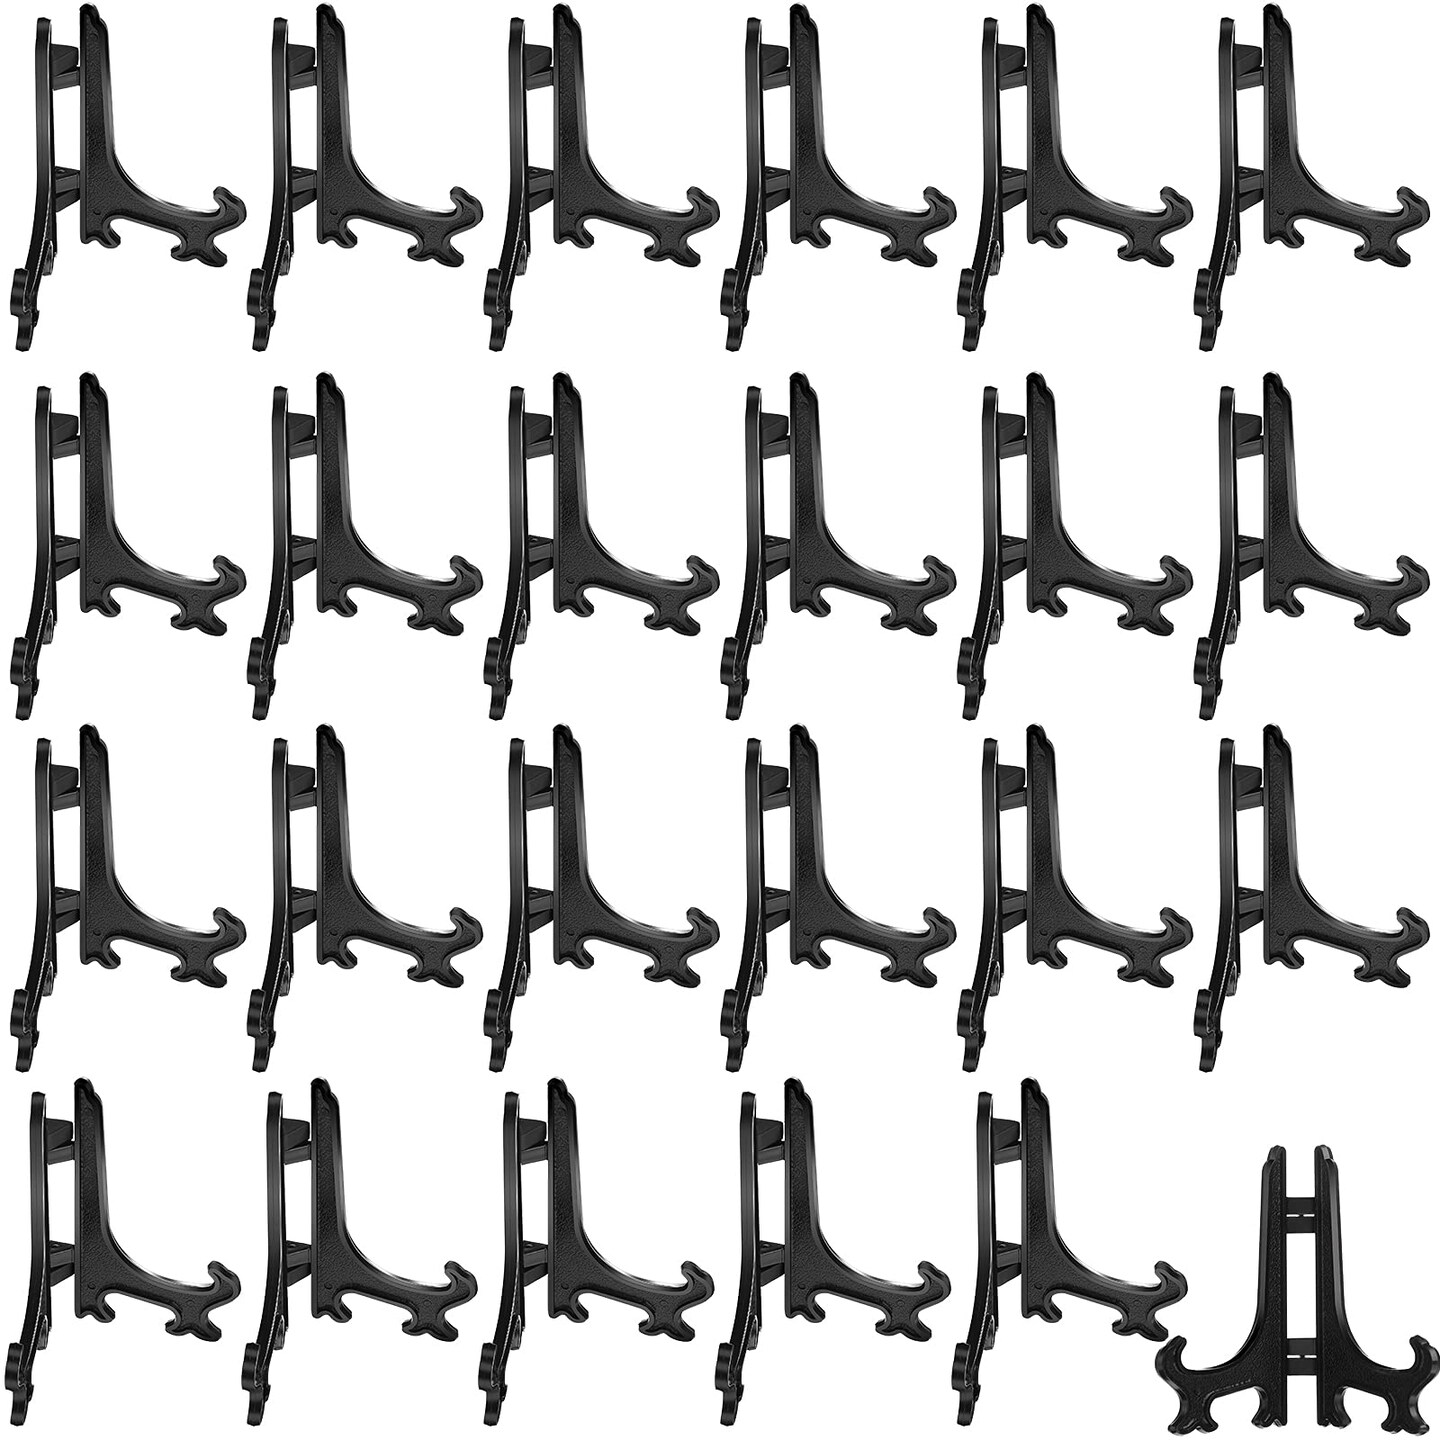 Boao 24 Pieces Plastic Easel Plate Display Stands Holders Picture Easel at Weddings, Home Decoration (Black, 3 Inch)